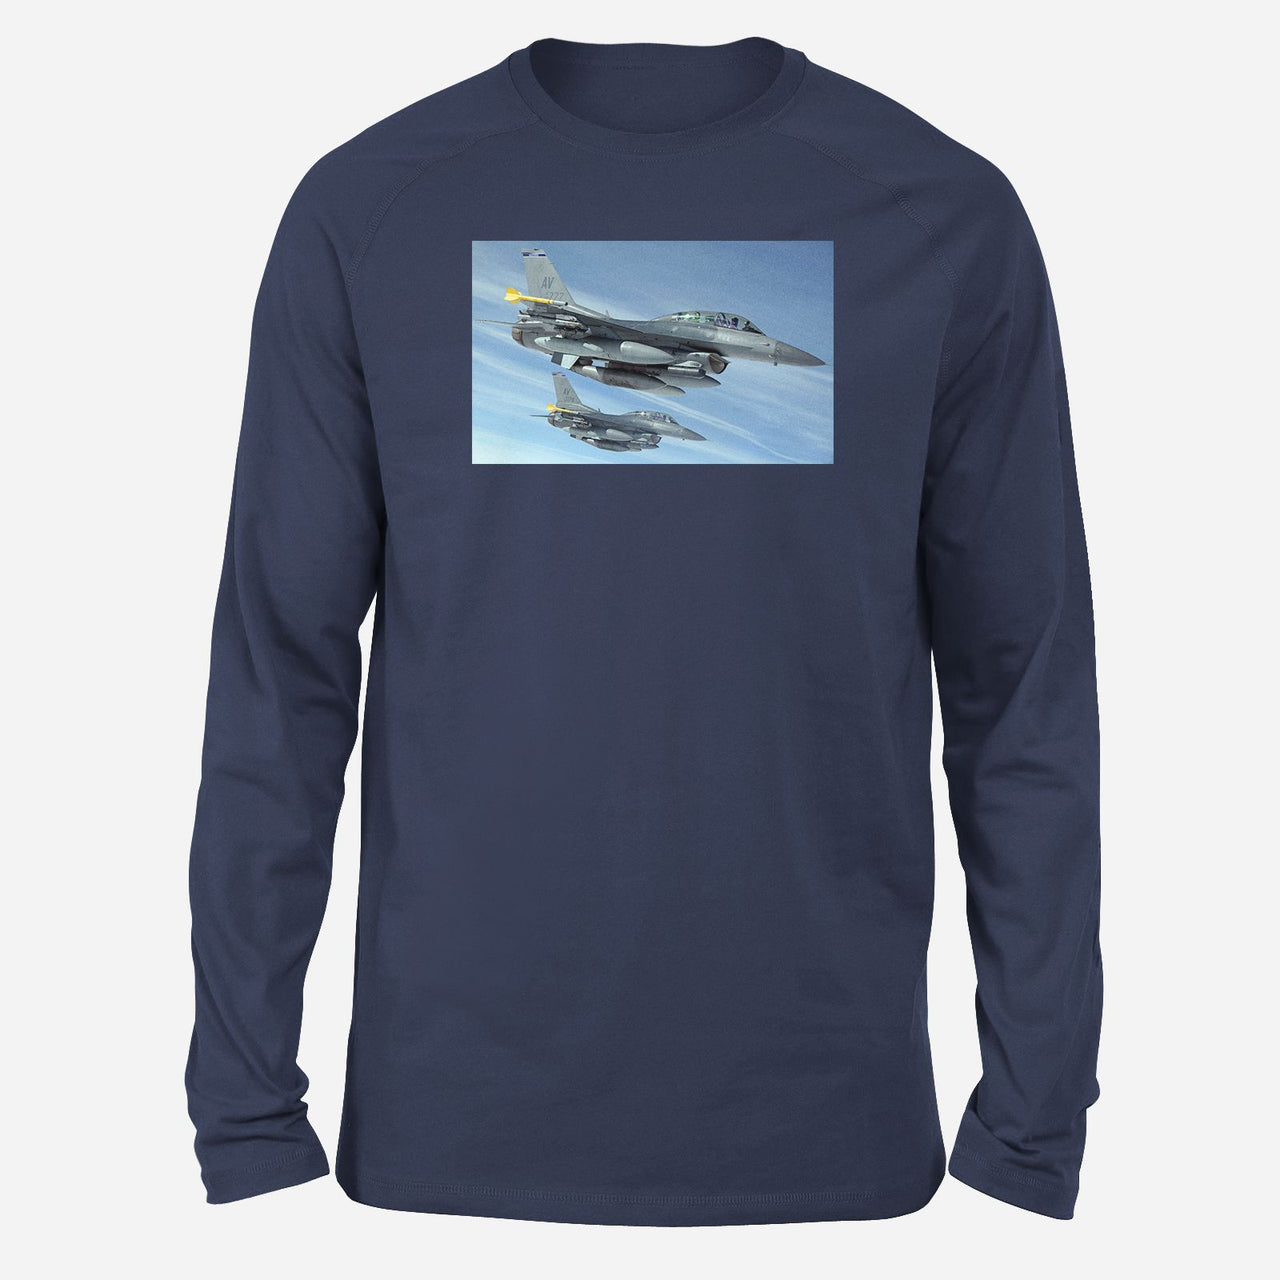 Two Fighting Falcon Designed Long-Sleeve T-Shirts